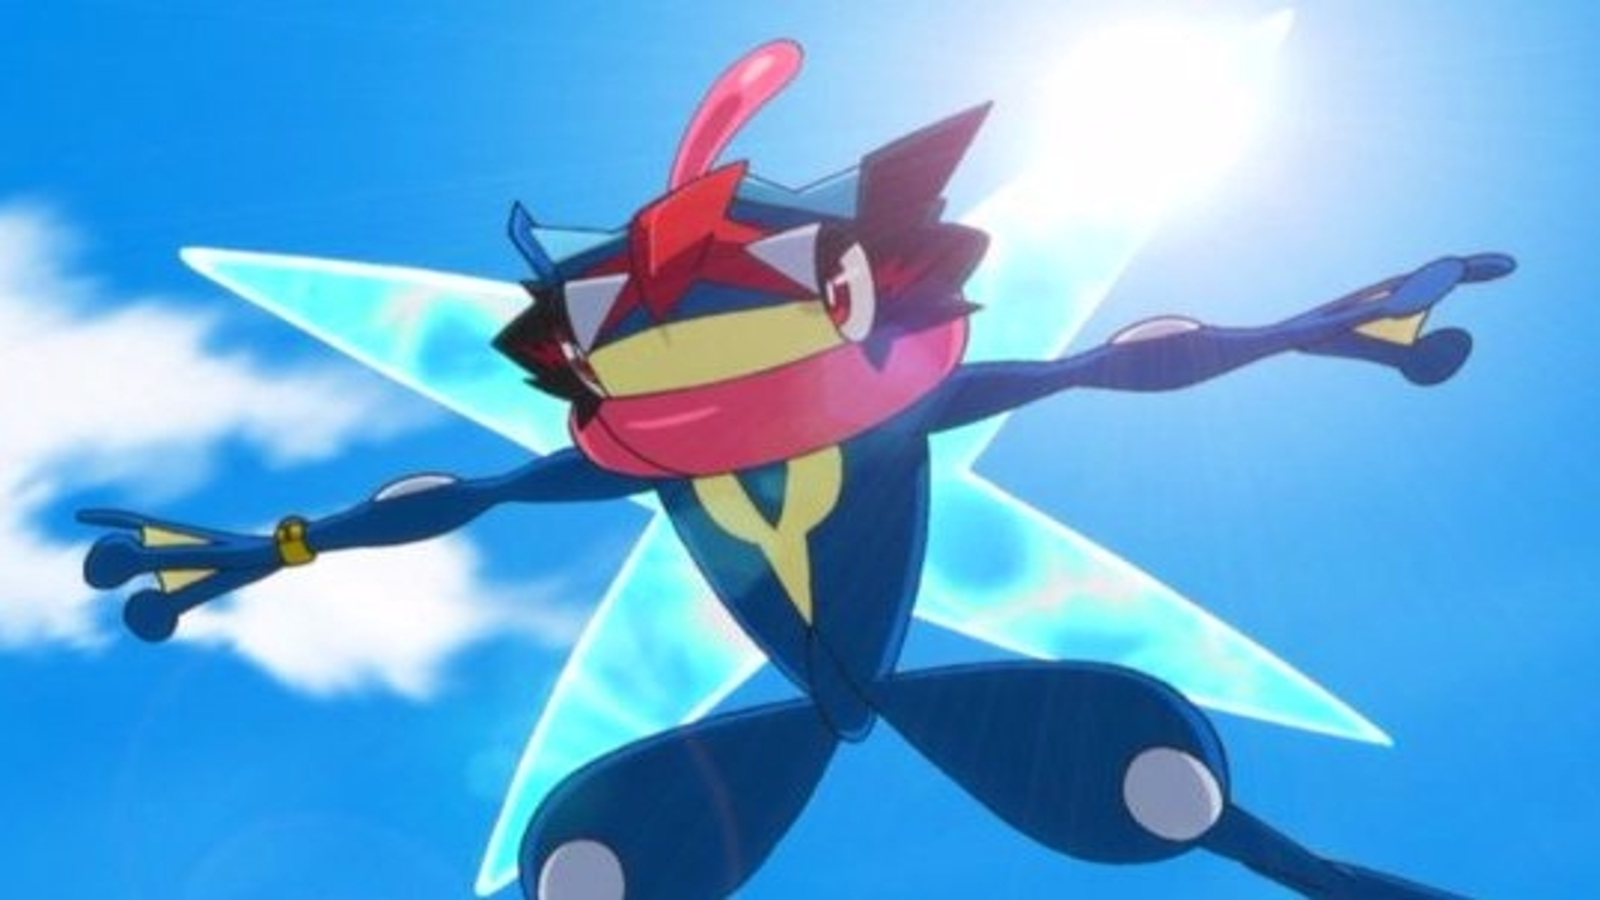 Pokémon Sun And Moon Demo Guide - How To Unlock Ash-Greninja And Transfer  To The Full Game | Eurogamer.Net